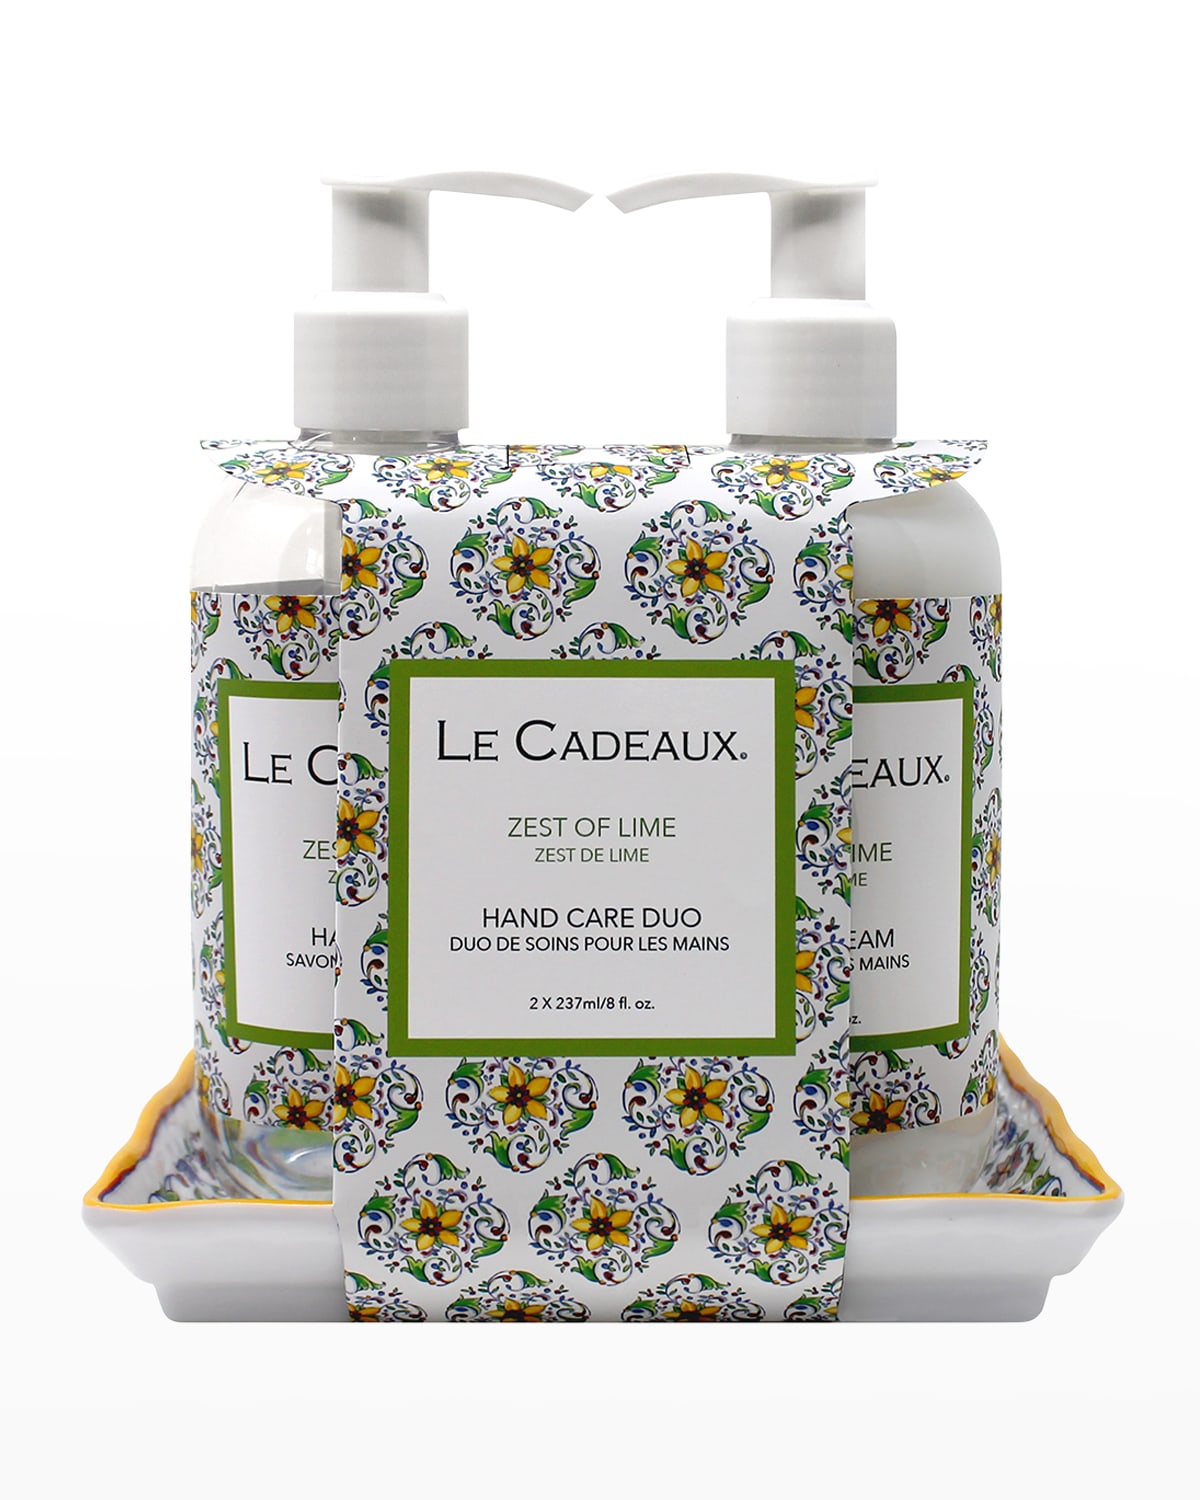 Le Cadeaux Hand Wash And Hand Cream Gift Set In Zest Of Lime